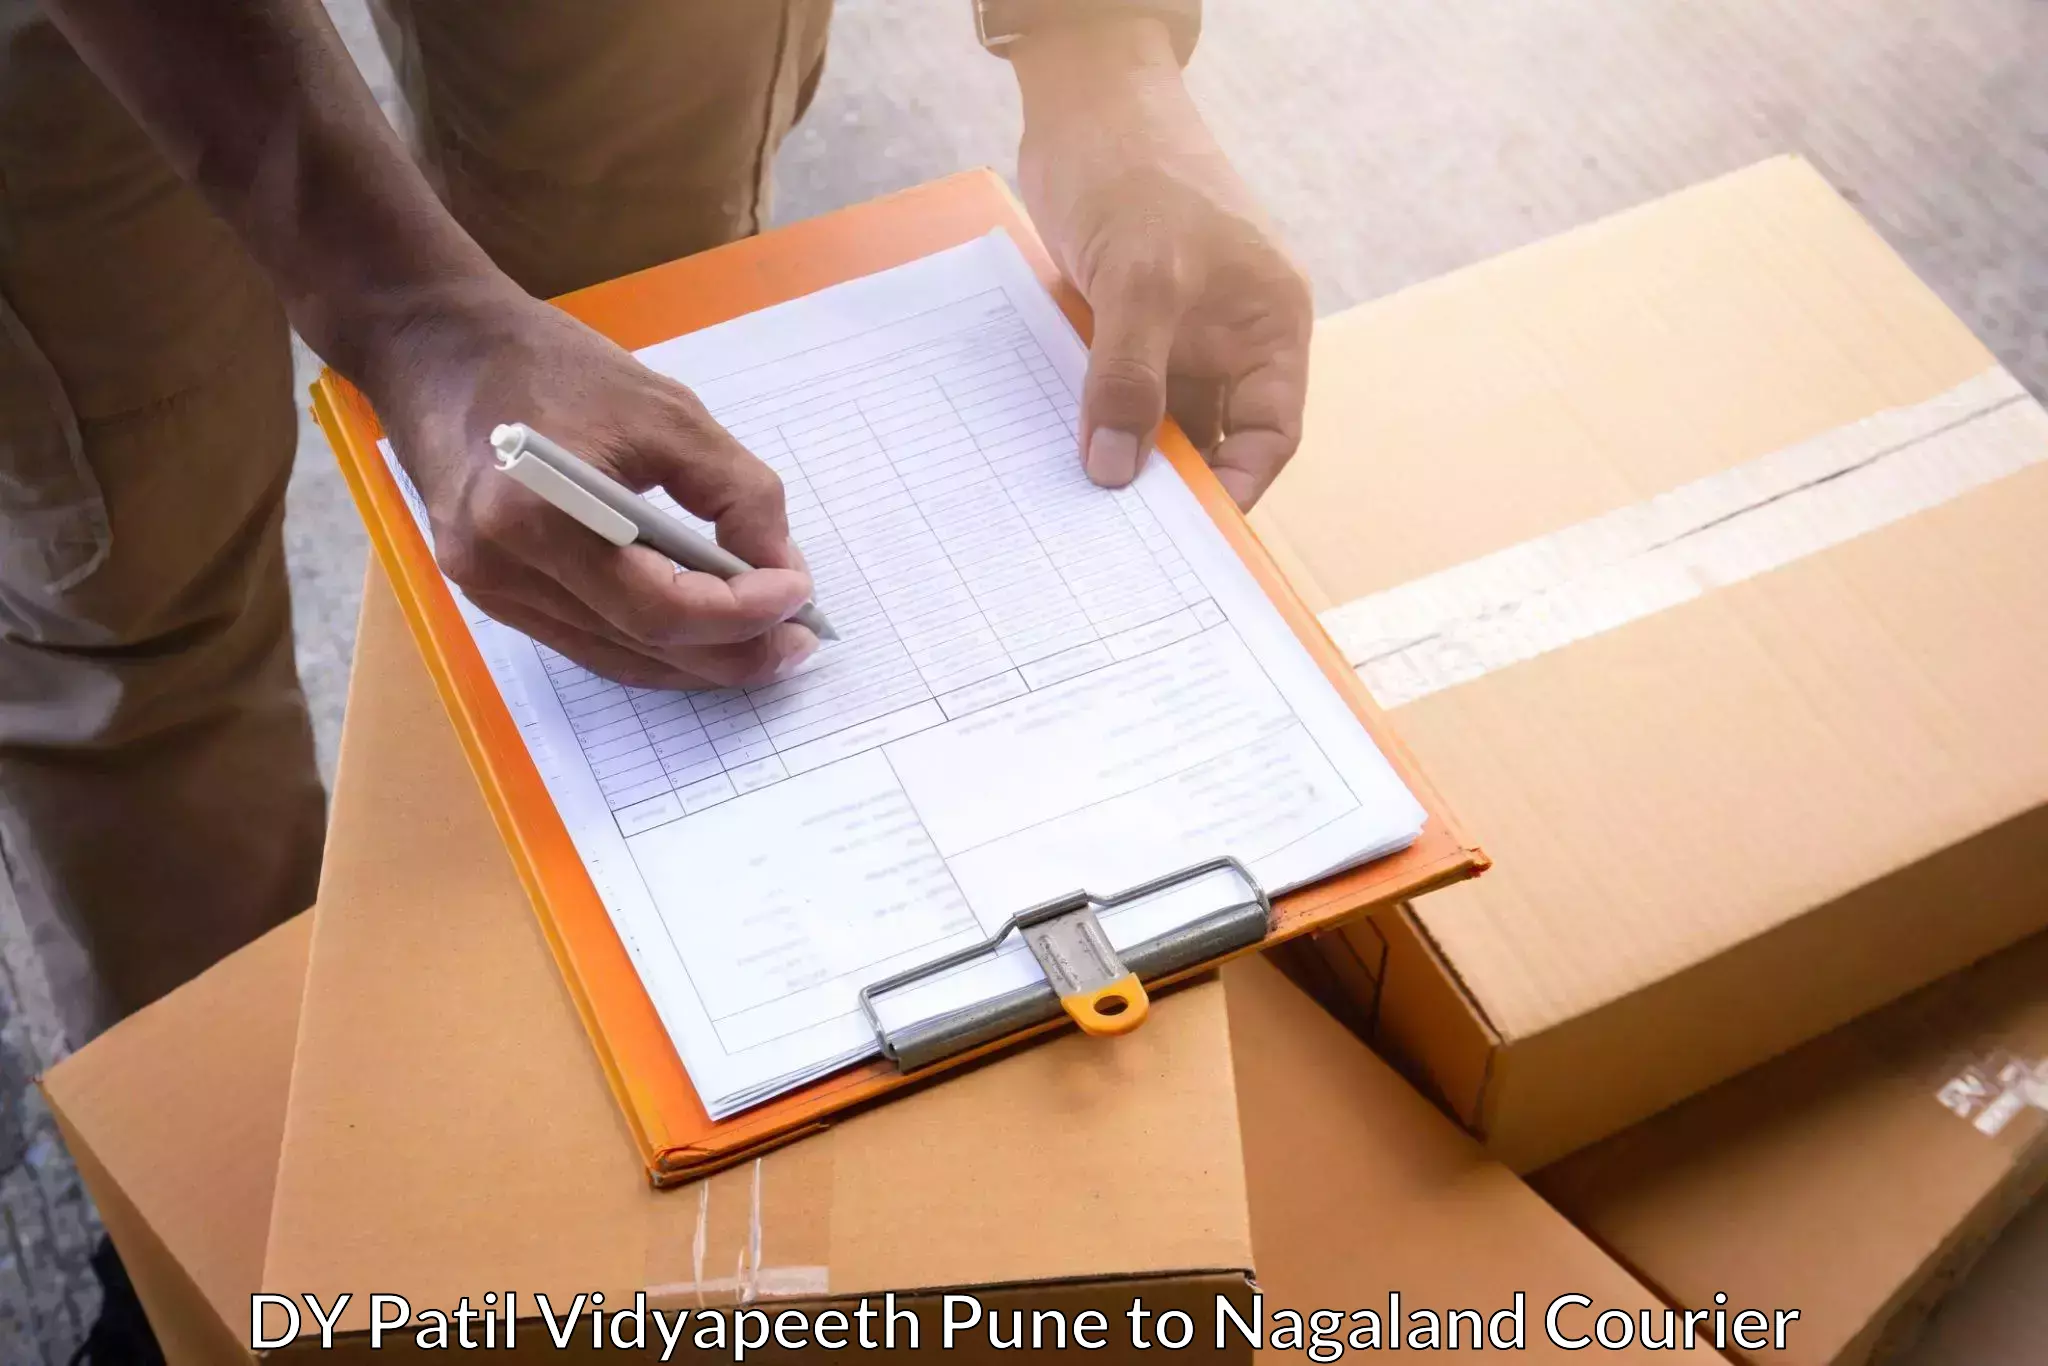 Pharmaceutical courier DY Patil Vidyapeeth Pune to Chumukedima